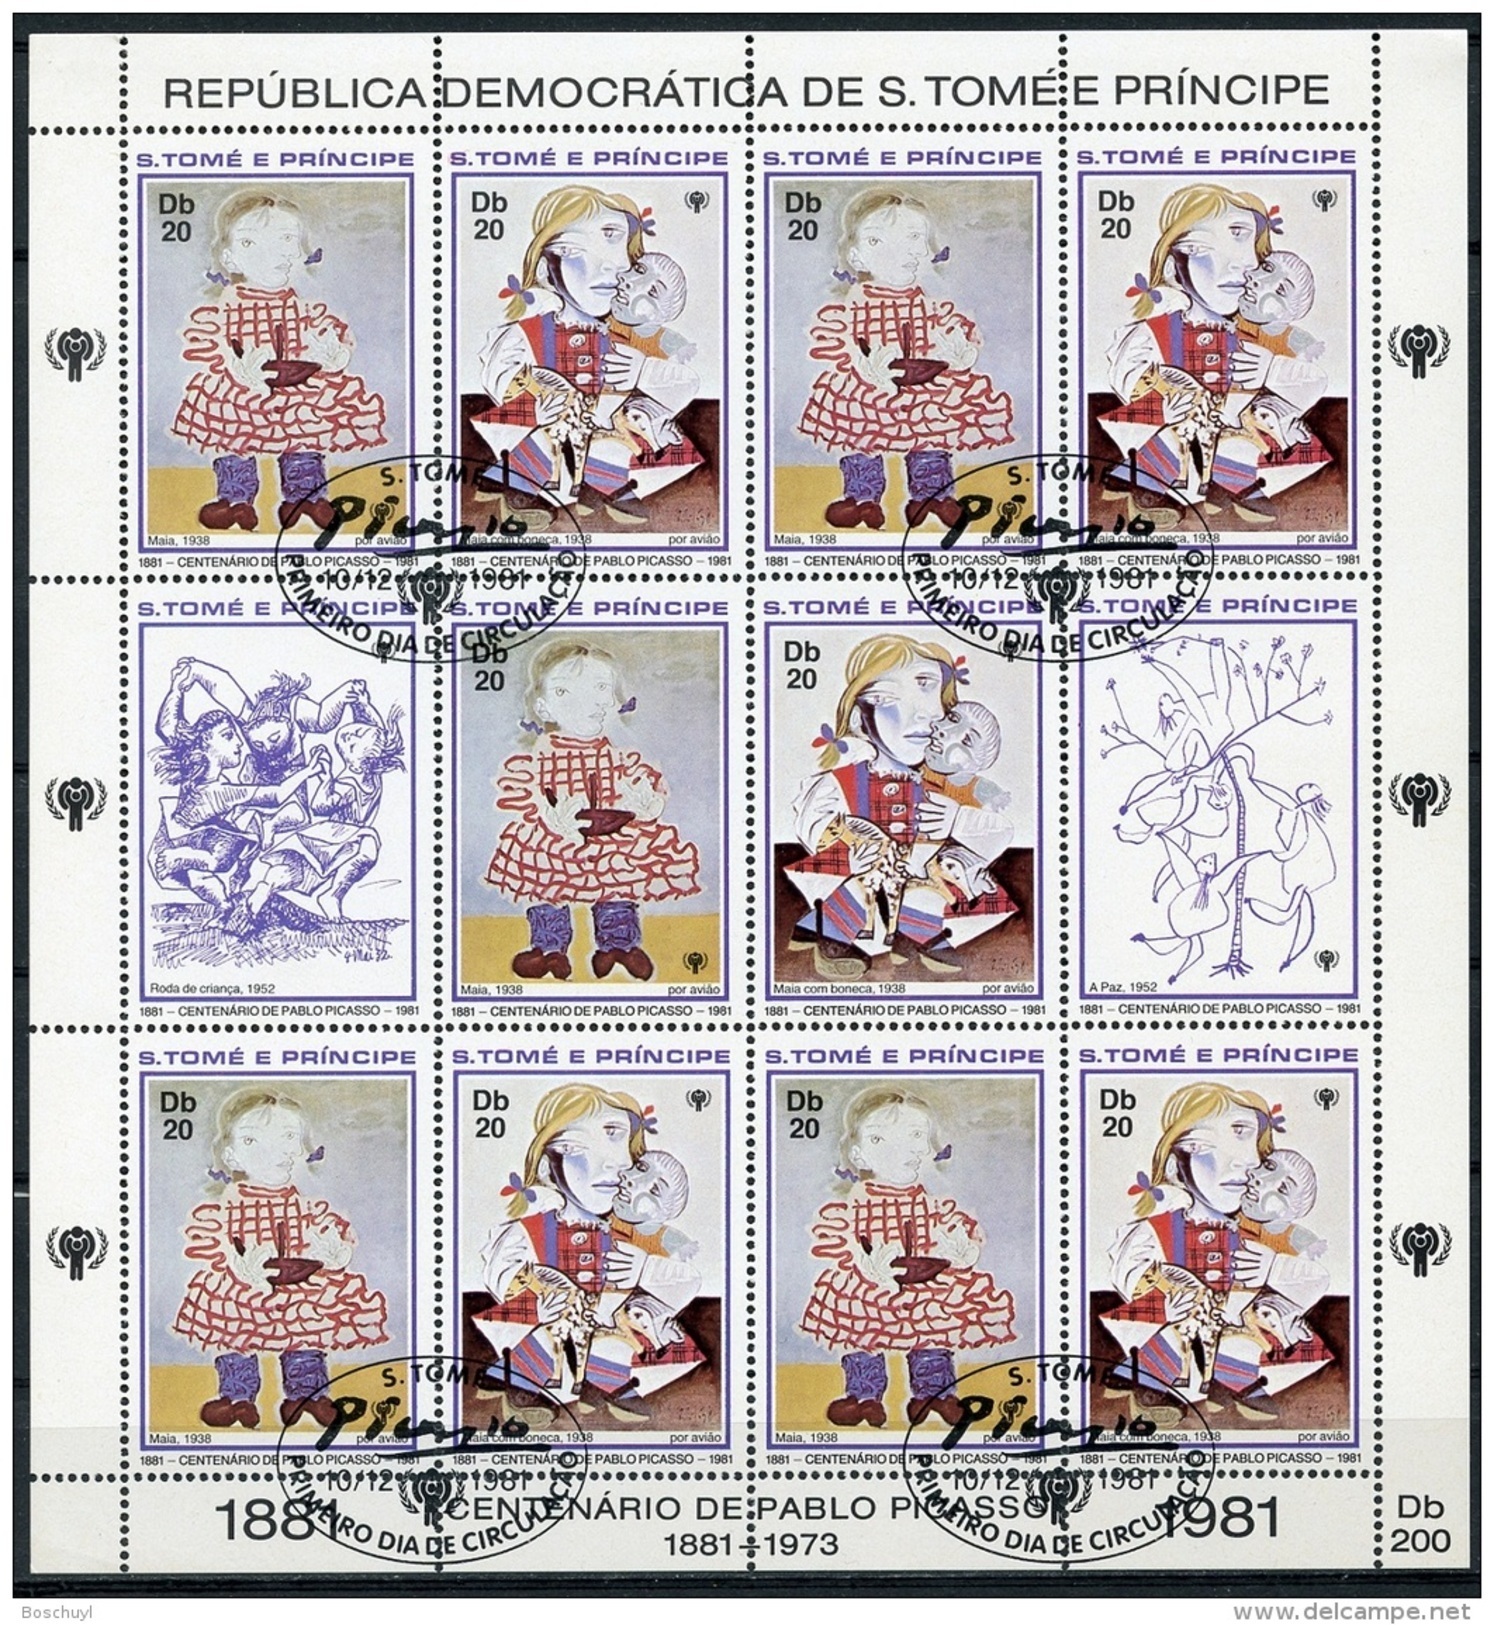 Sao Tome E Principe, 1981, Picasso, International Year Of The Child, IYC, United Nations, Cancelled Sheet, Michel 719-20 - Sao Tome Et Principe